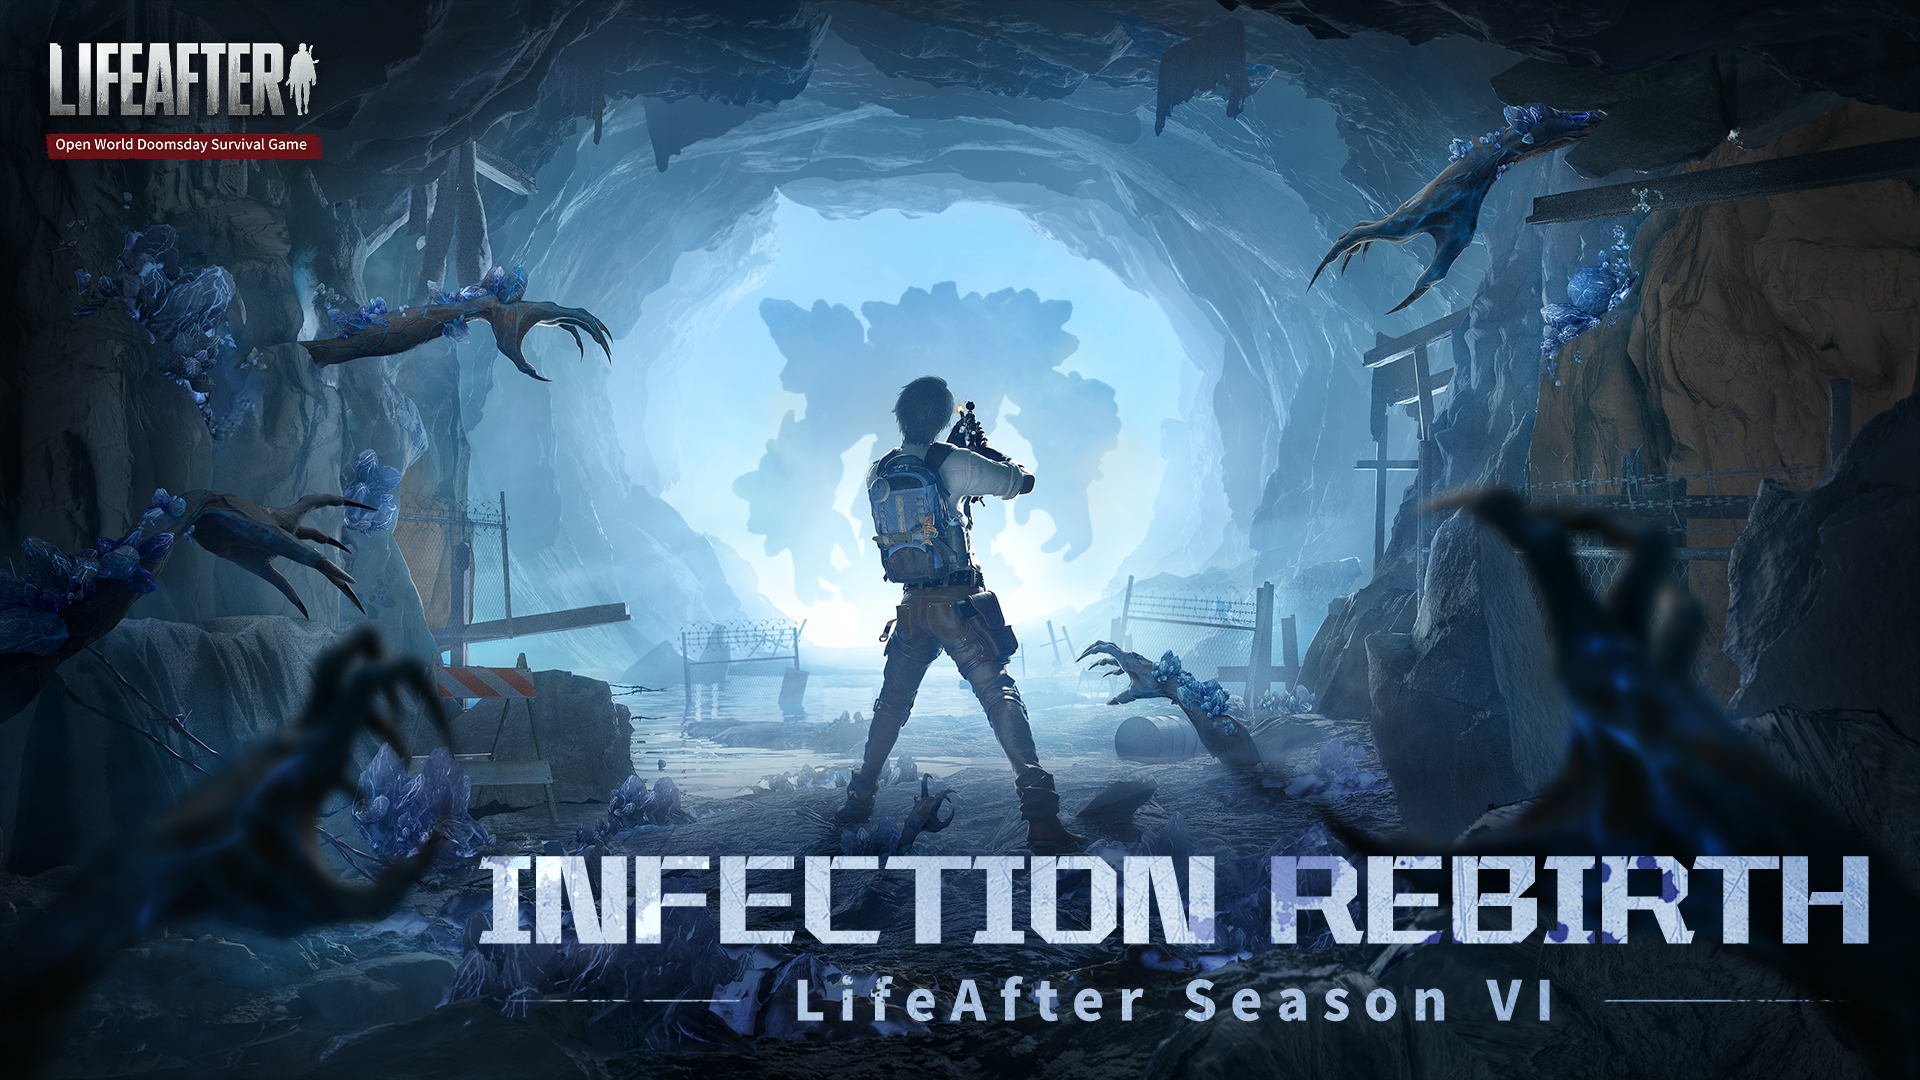 Download LifeAfter for PC/Windows - Jam Online